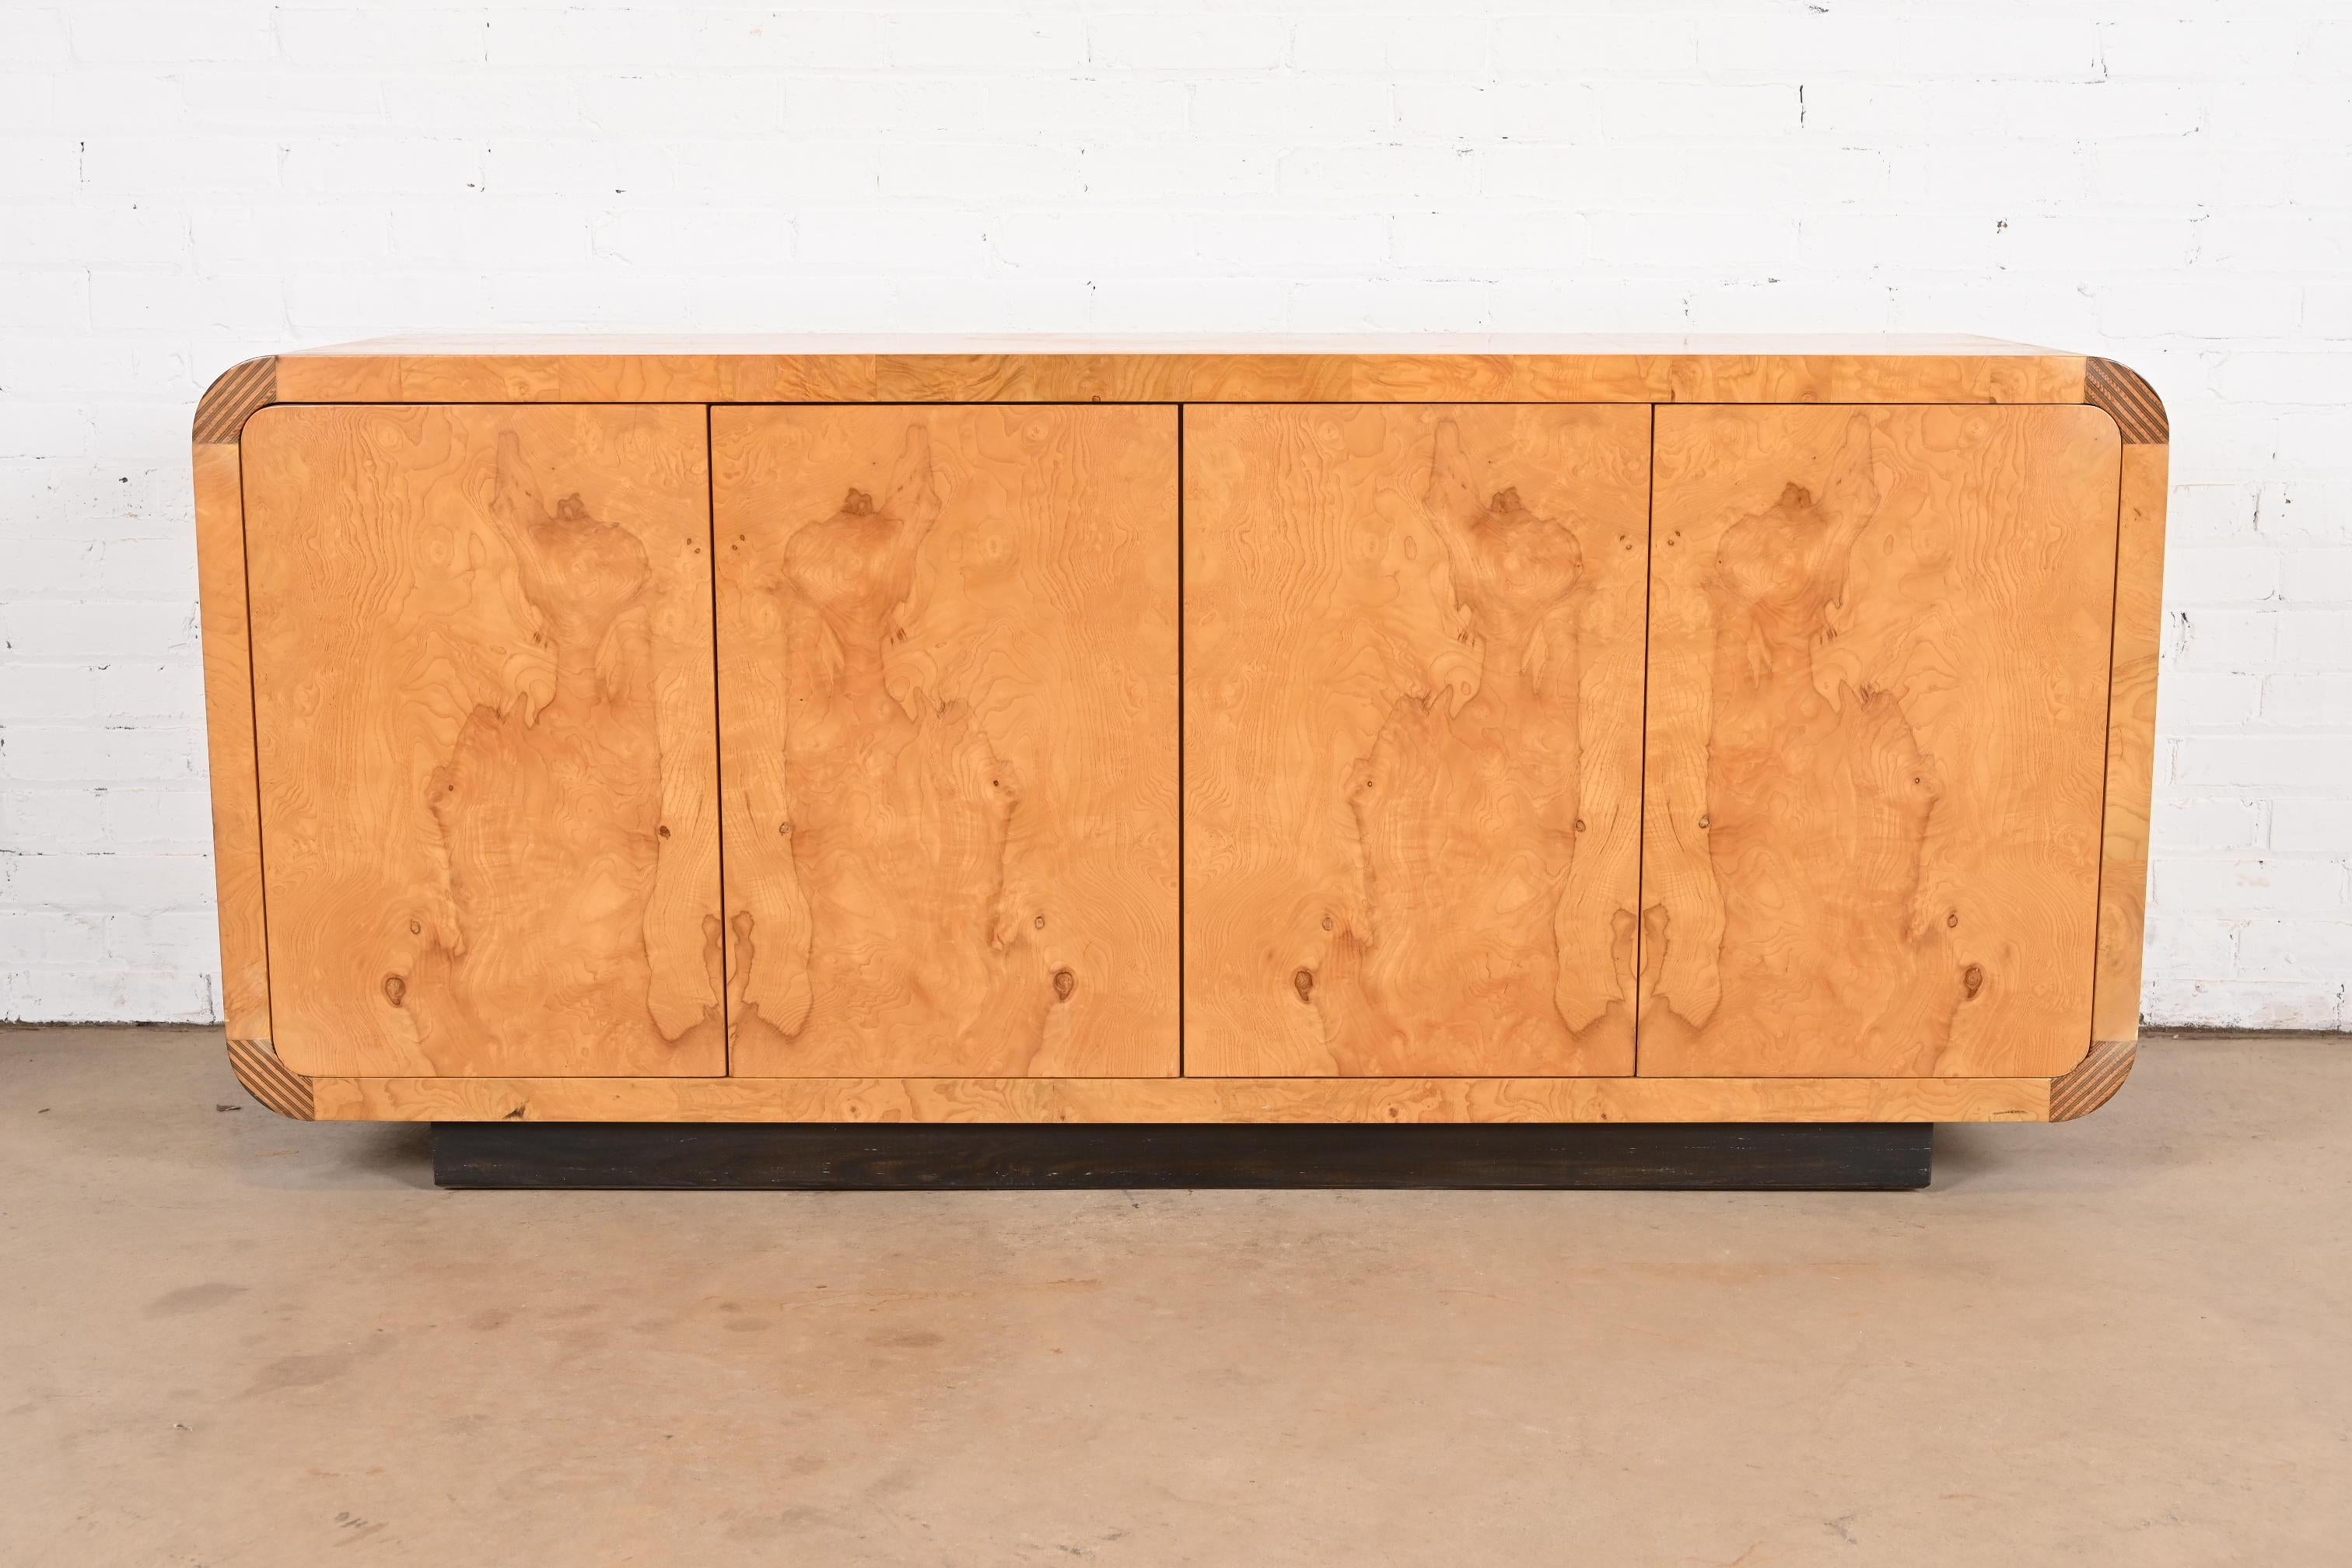 A gorgeous Milo Baughman style Mid-Century Modern burl wood sideboard, credenza, or bar cabinet

By Henredon, 